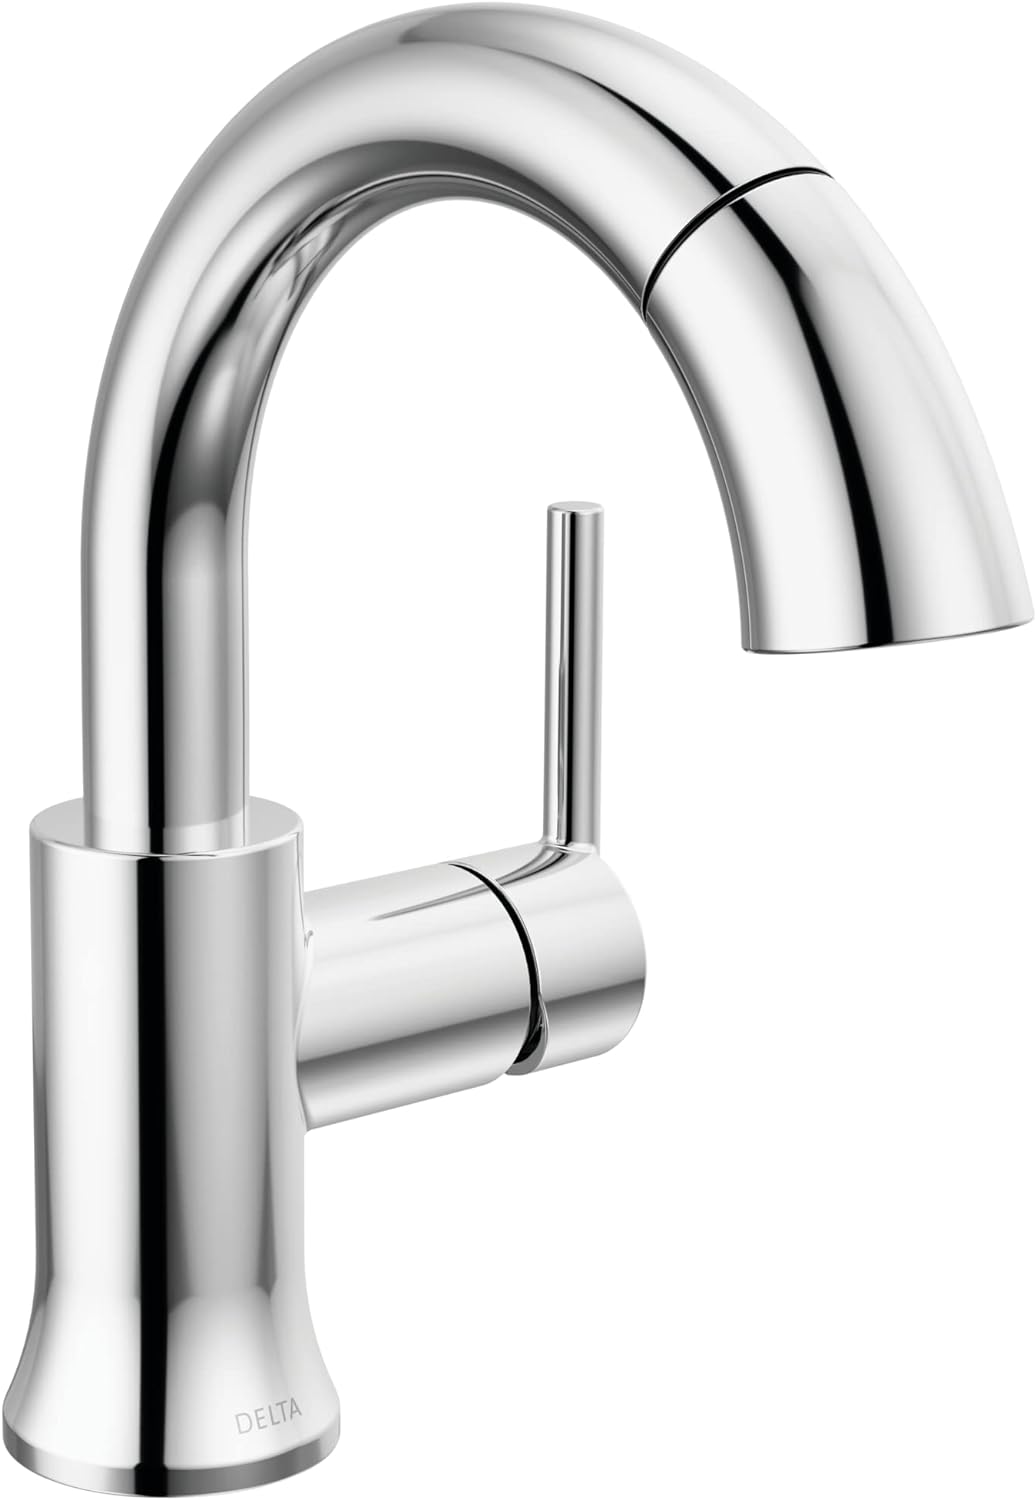 Delta Faucet Trinsic Pull Down Bathroom Faucet, Bathroom Pull Out Faucet, Chrome Single Hole Bathroom Faucet with Pull Down Sprayer, Bathroom Sink Faucet Magnetic Docking, Chrome 559HAR-PD-DST